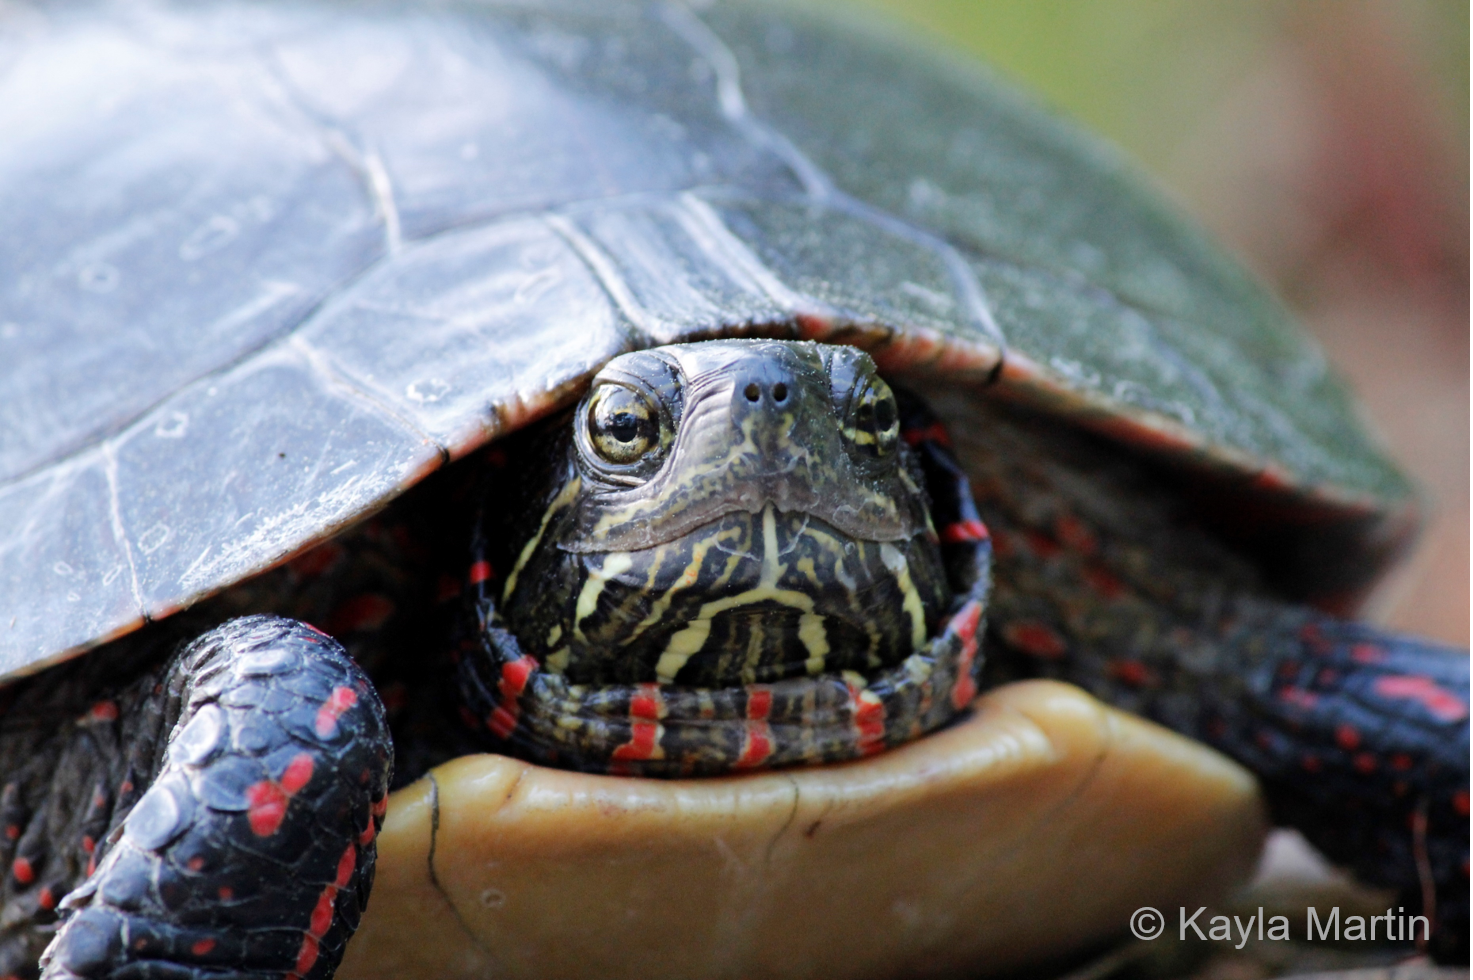 A close-up of a painted turtle&#039;s face